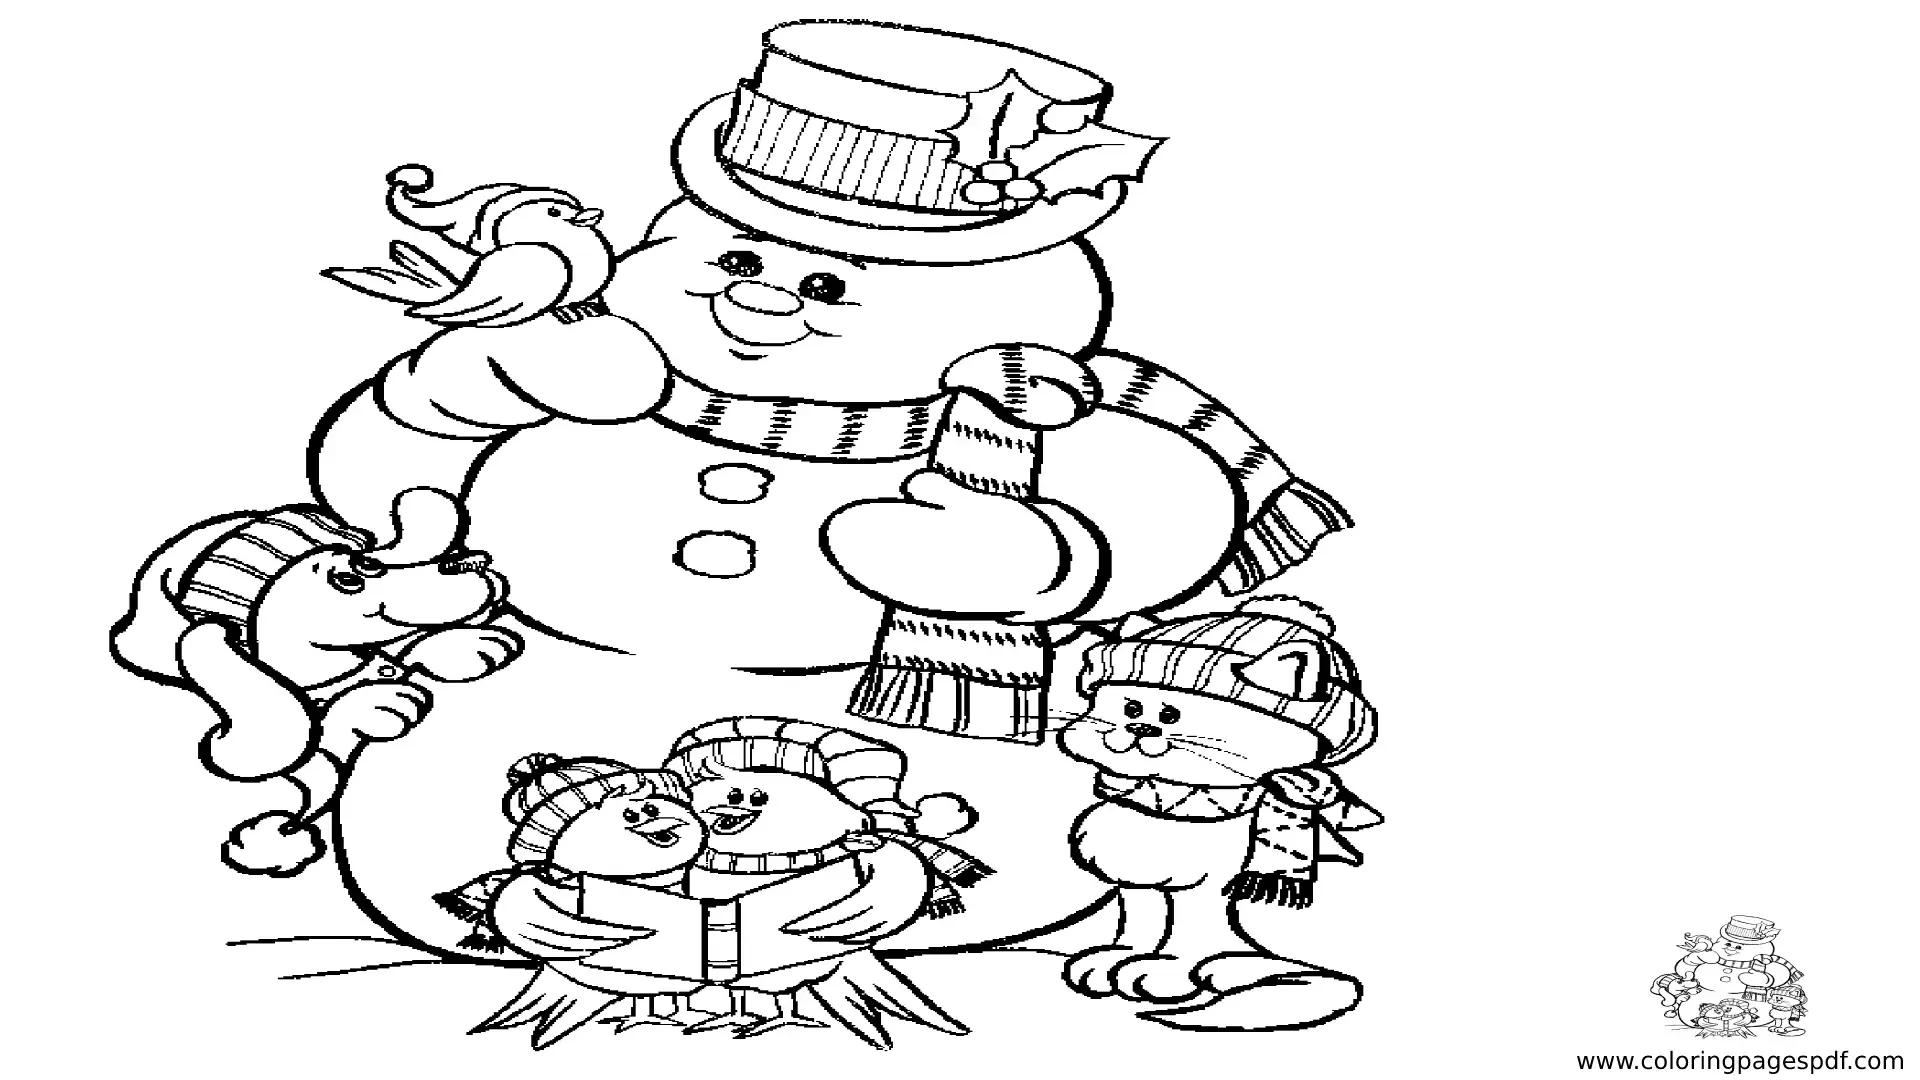 Coloring Page Of A Snowman With Animals